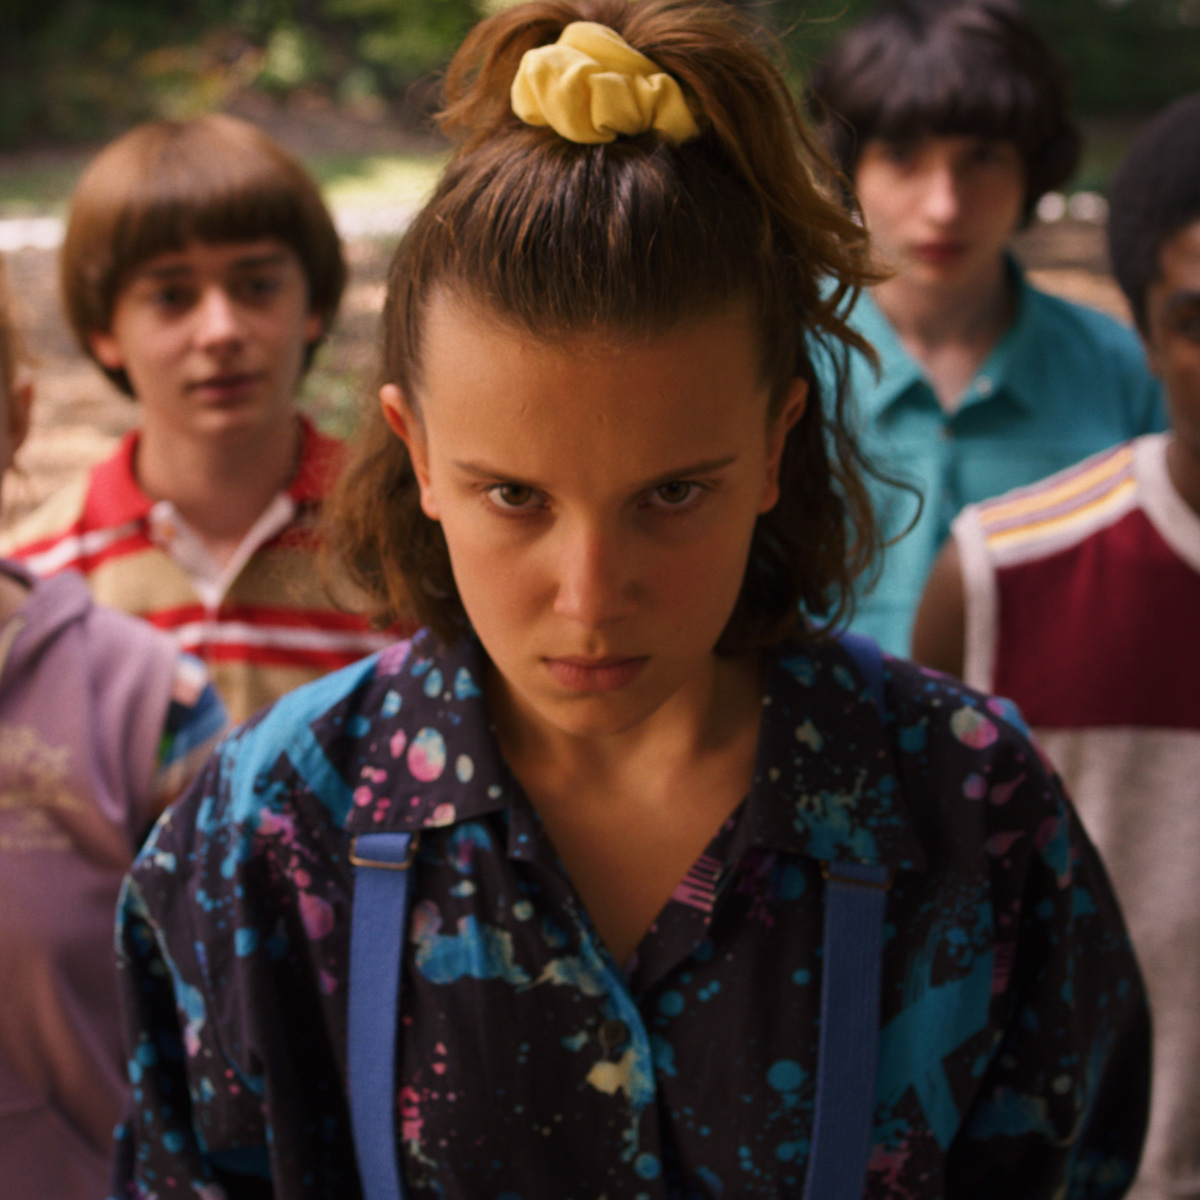 I'm just so not ready for that': When young Millie Bobby Brown thought  wearing red is 'womanly' and felt scared